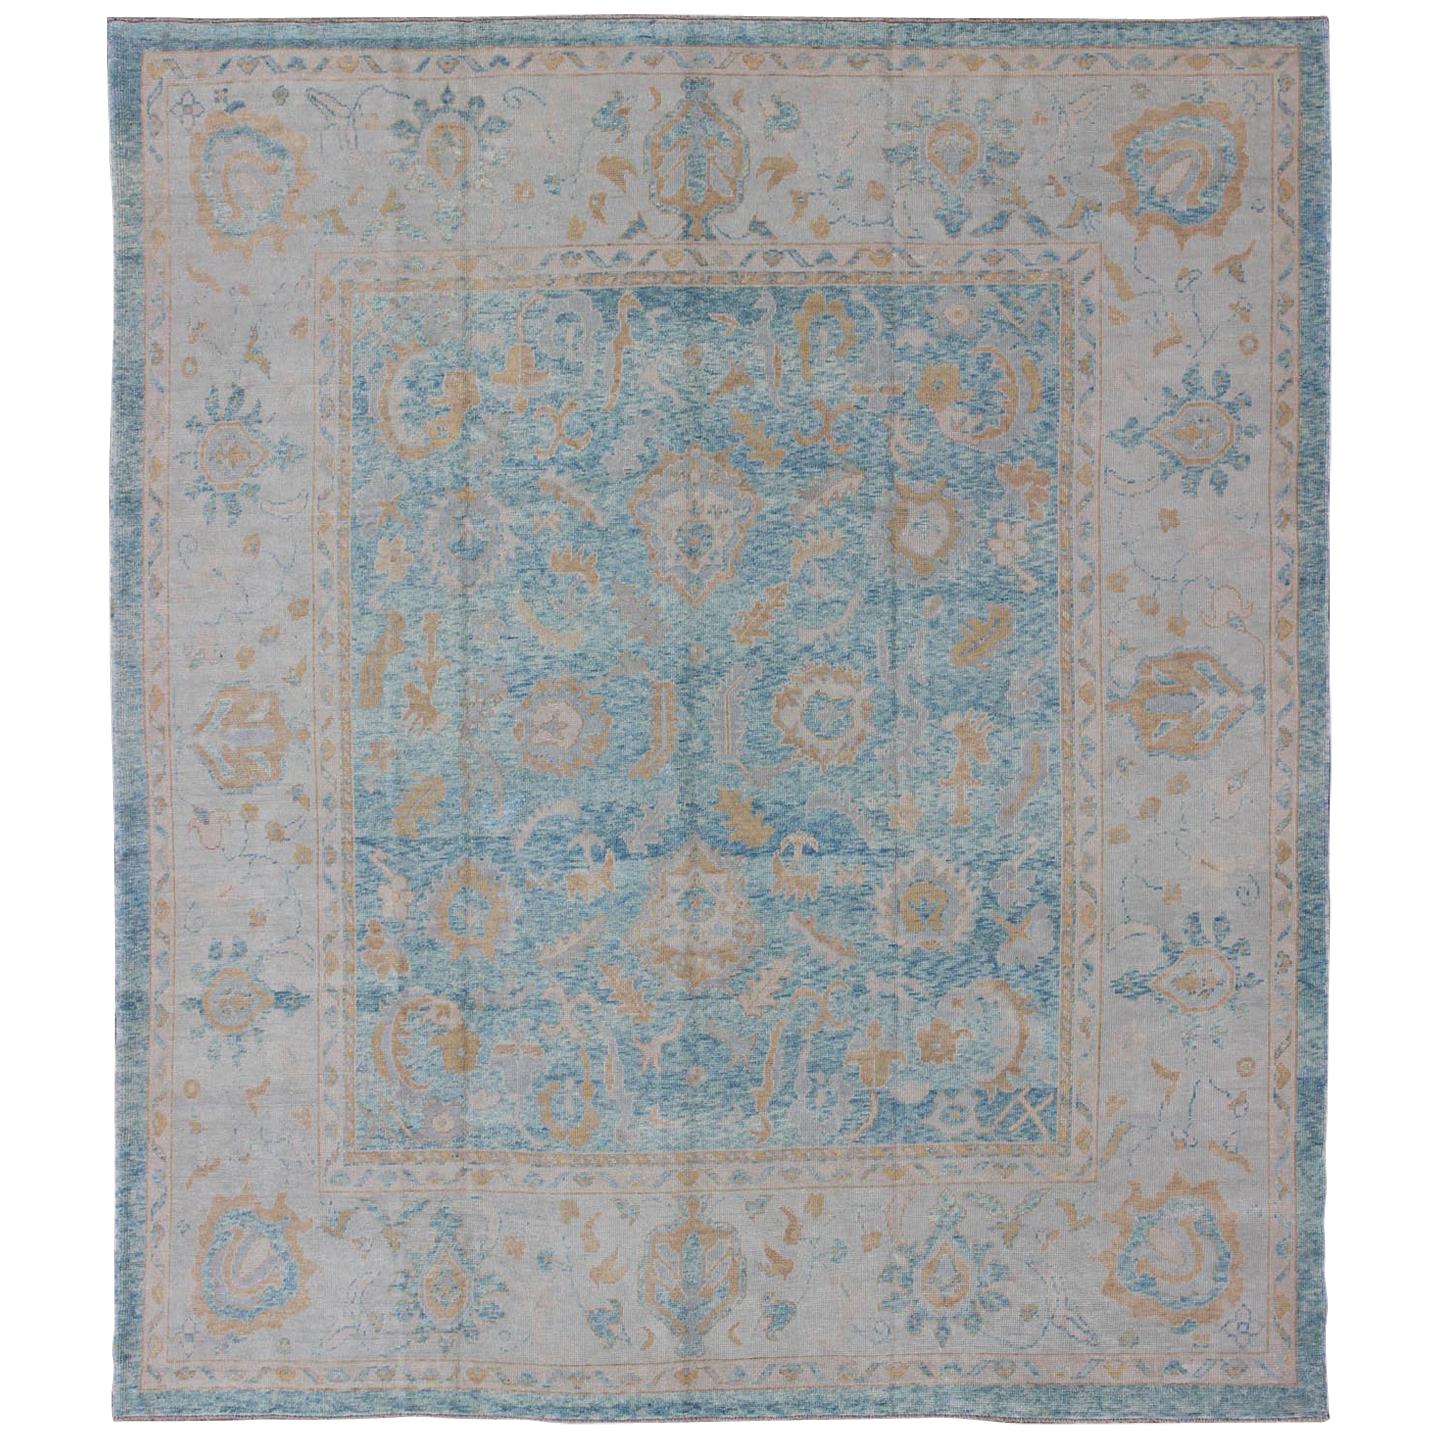 Angora Turkish Oushak Rug in Blue, Silver, Taupe and Tan Colors For Sale